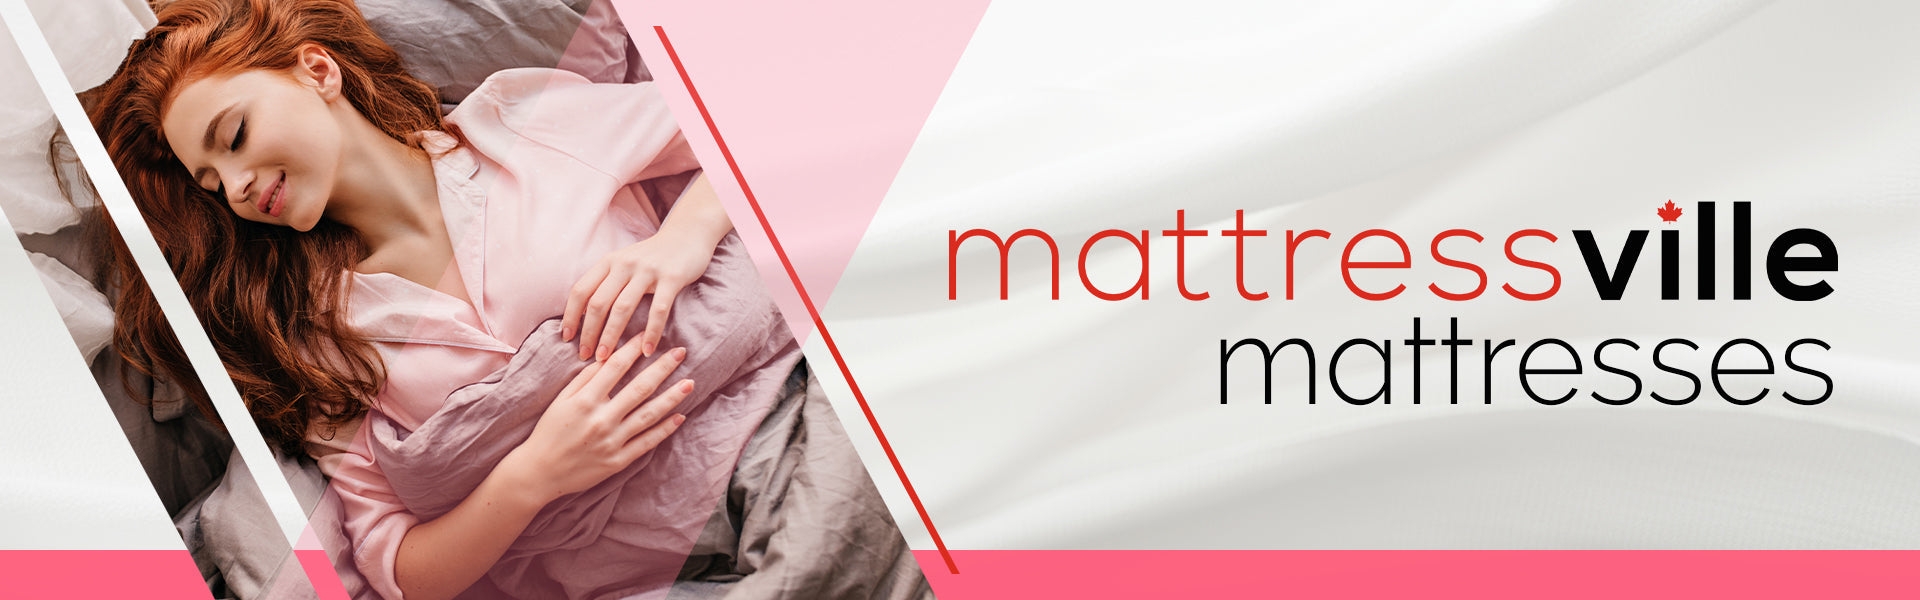 woman with red hair laying in bed under the covers wearing pink pajamas,  mattressville mattresses